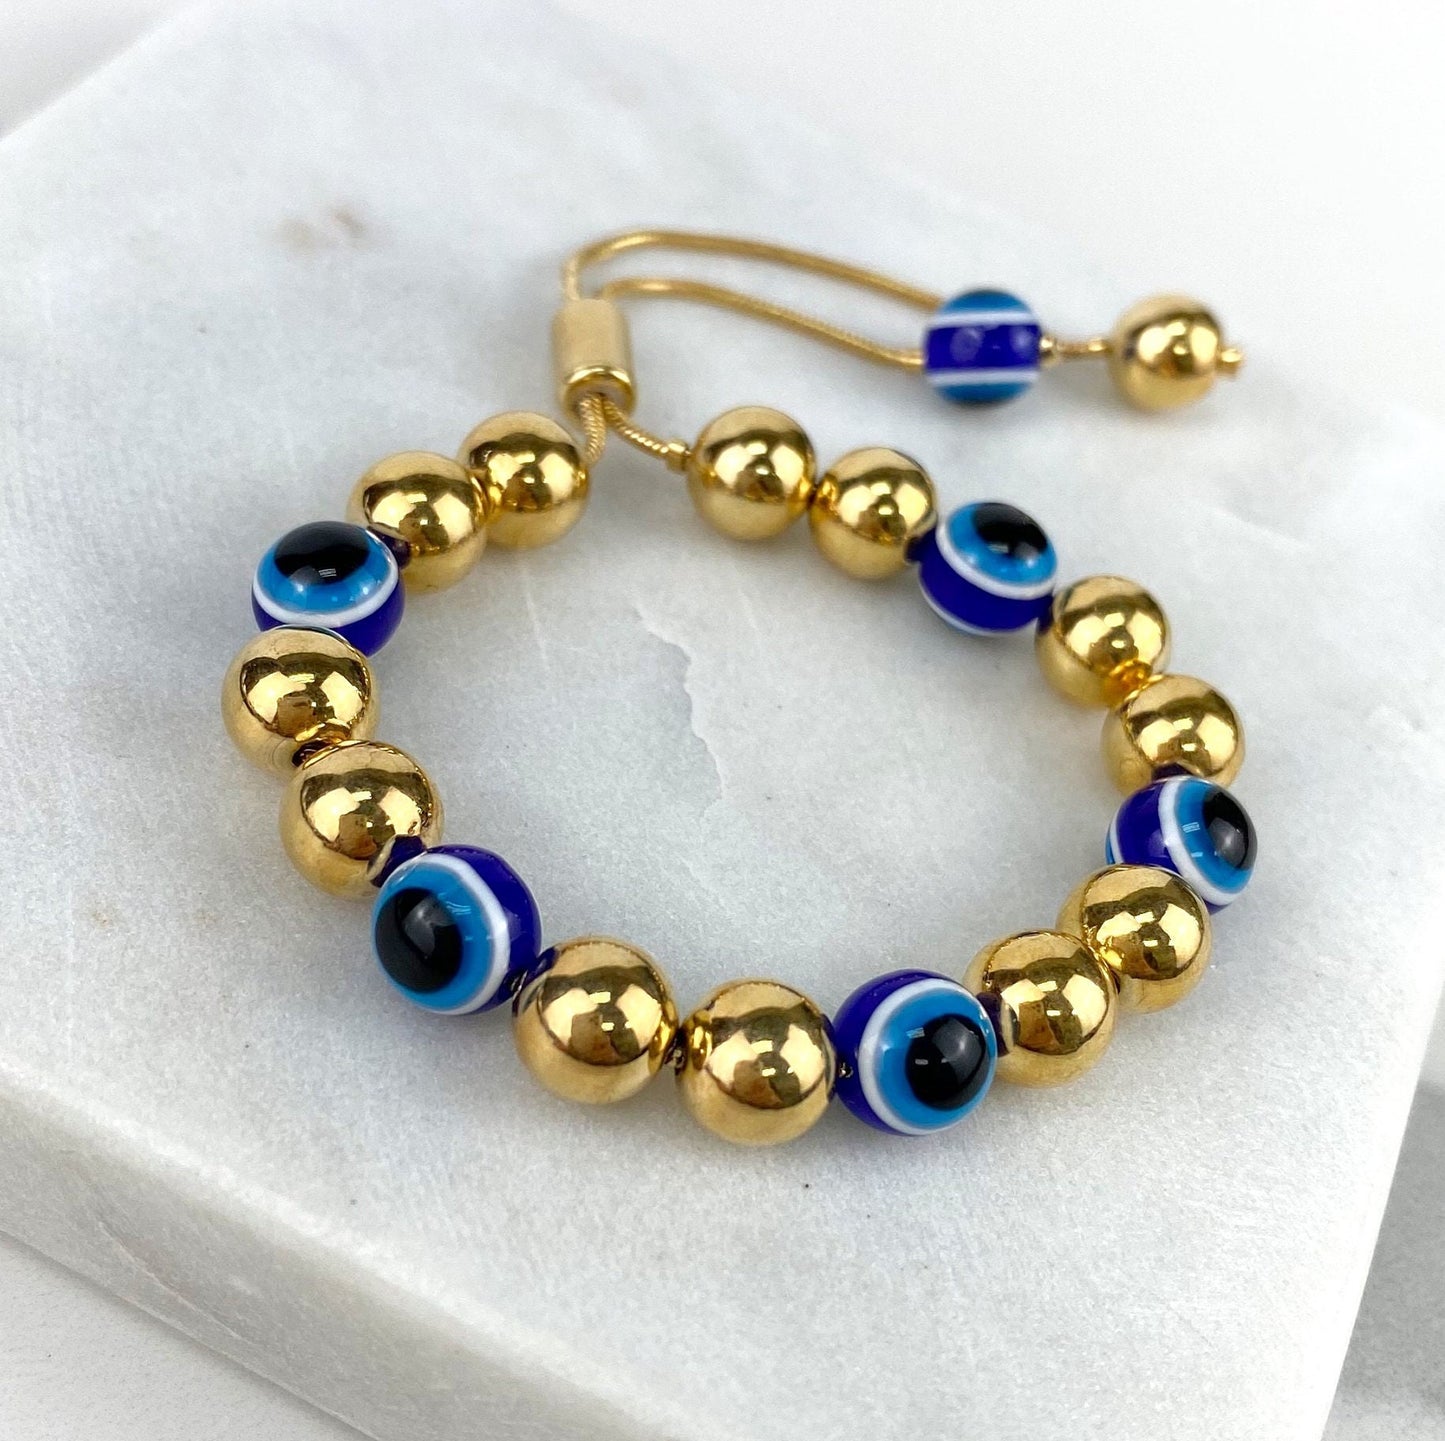 Adjustable 18k Gold Filled Bead Evil Eye Bracelet Featuring Slide Clasp And Glass Blue Evil Eye Ball Wholesale Jewelry Making Supplies